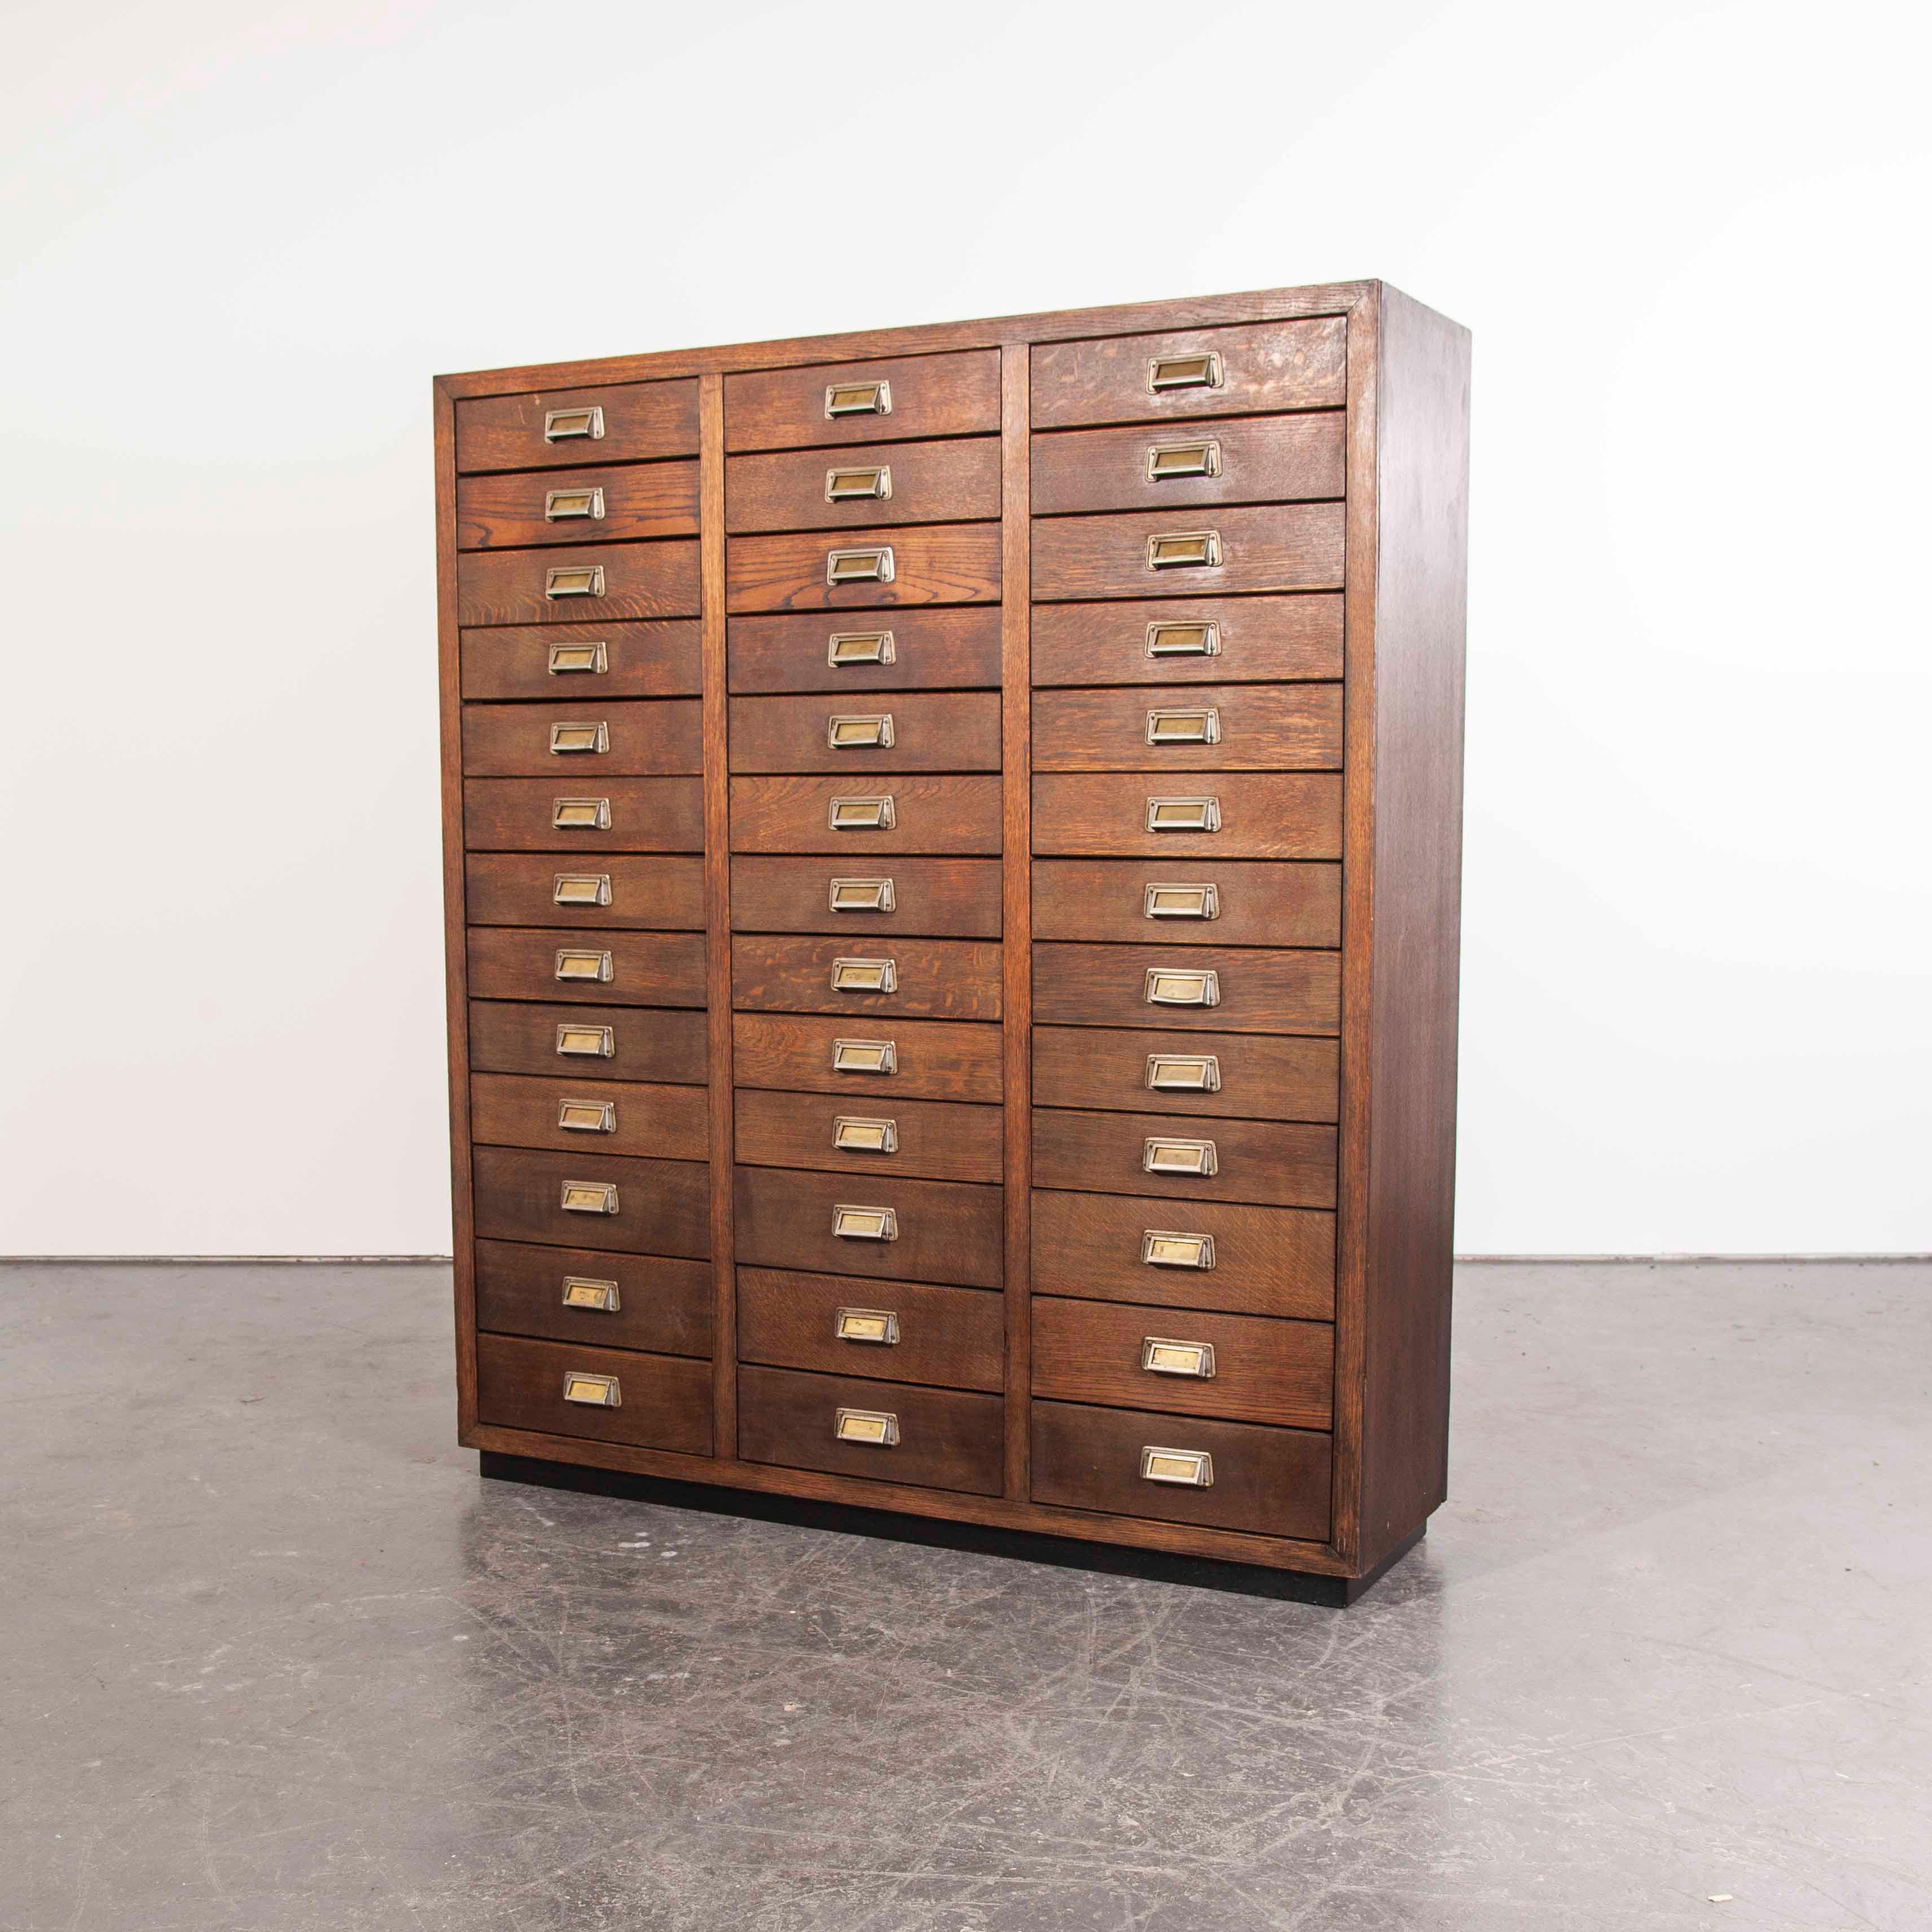 German 1950s Oak Apothecary Multi Drawer Chest of Drawers, Thirty Nine Drawers